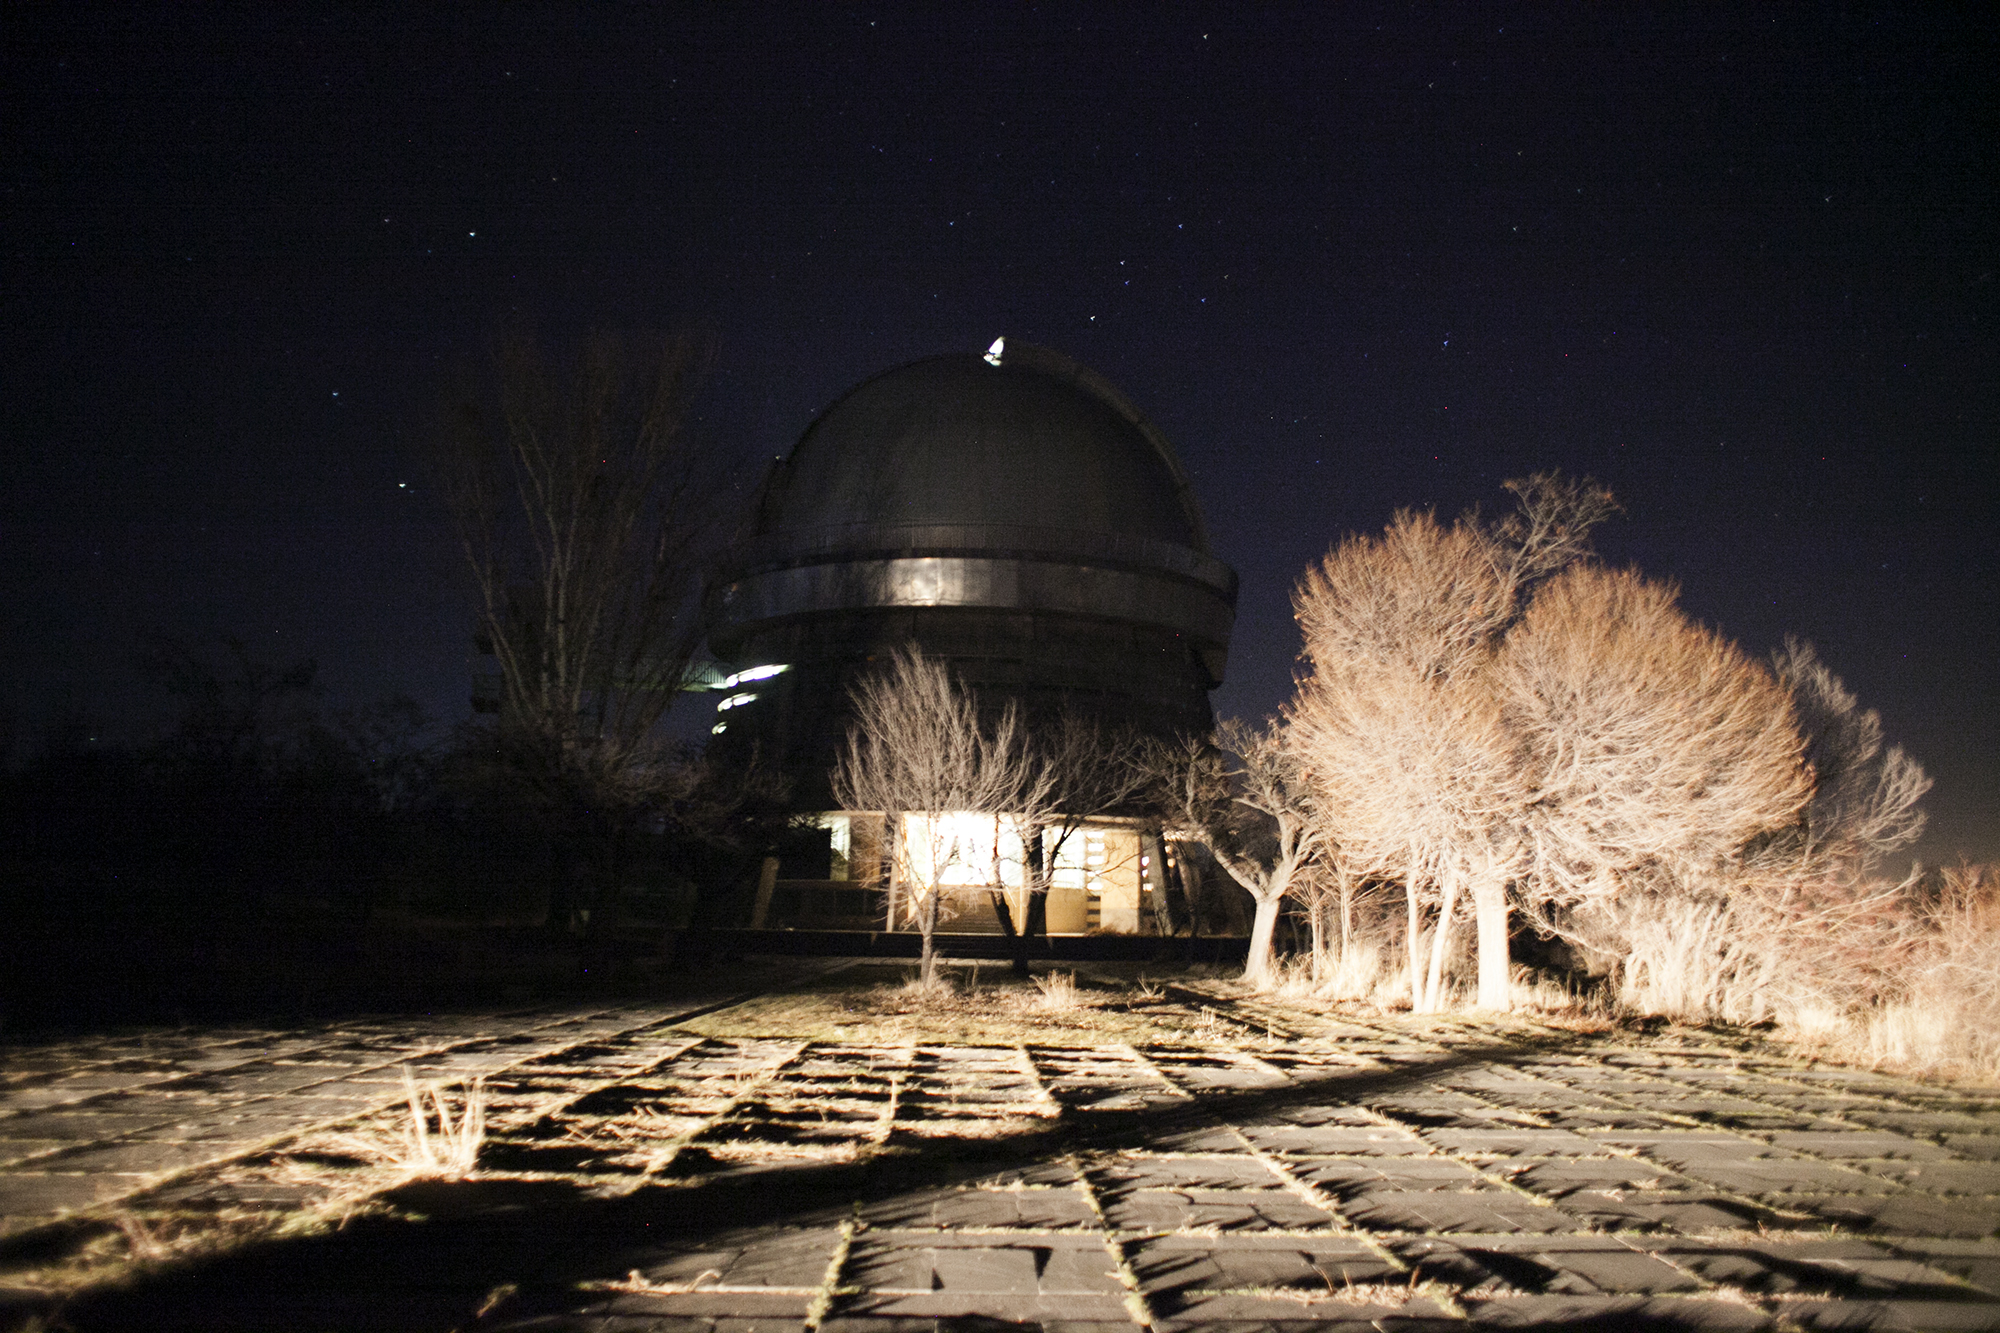 The 2.6m telescope is the largest telescope at the Byurakan Observatory.